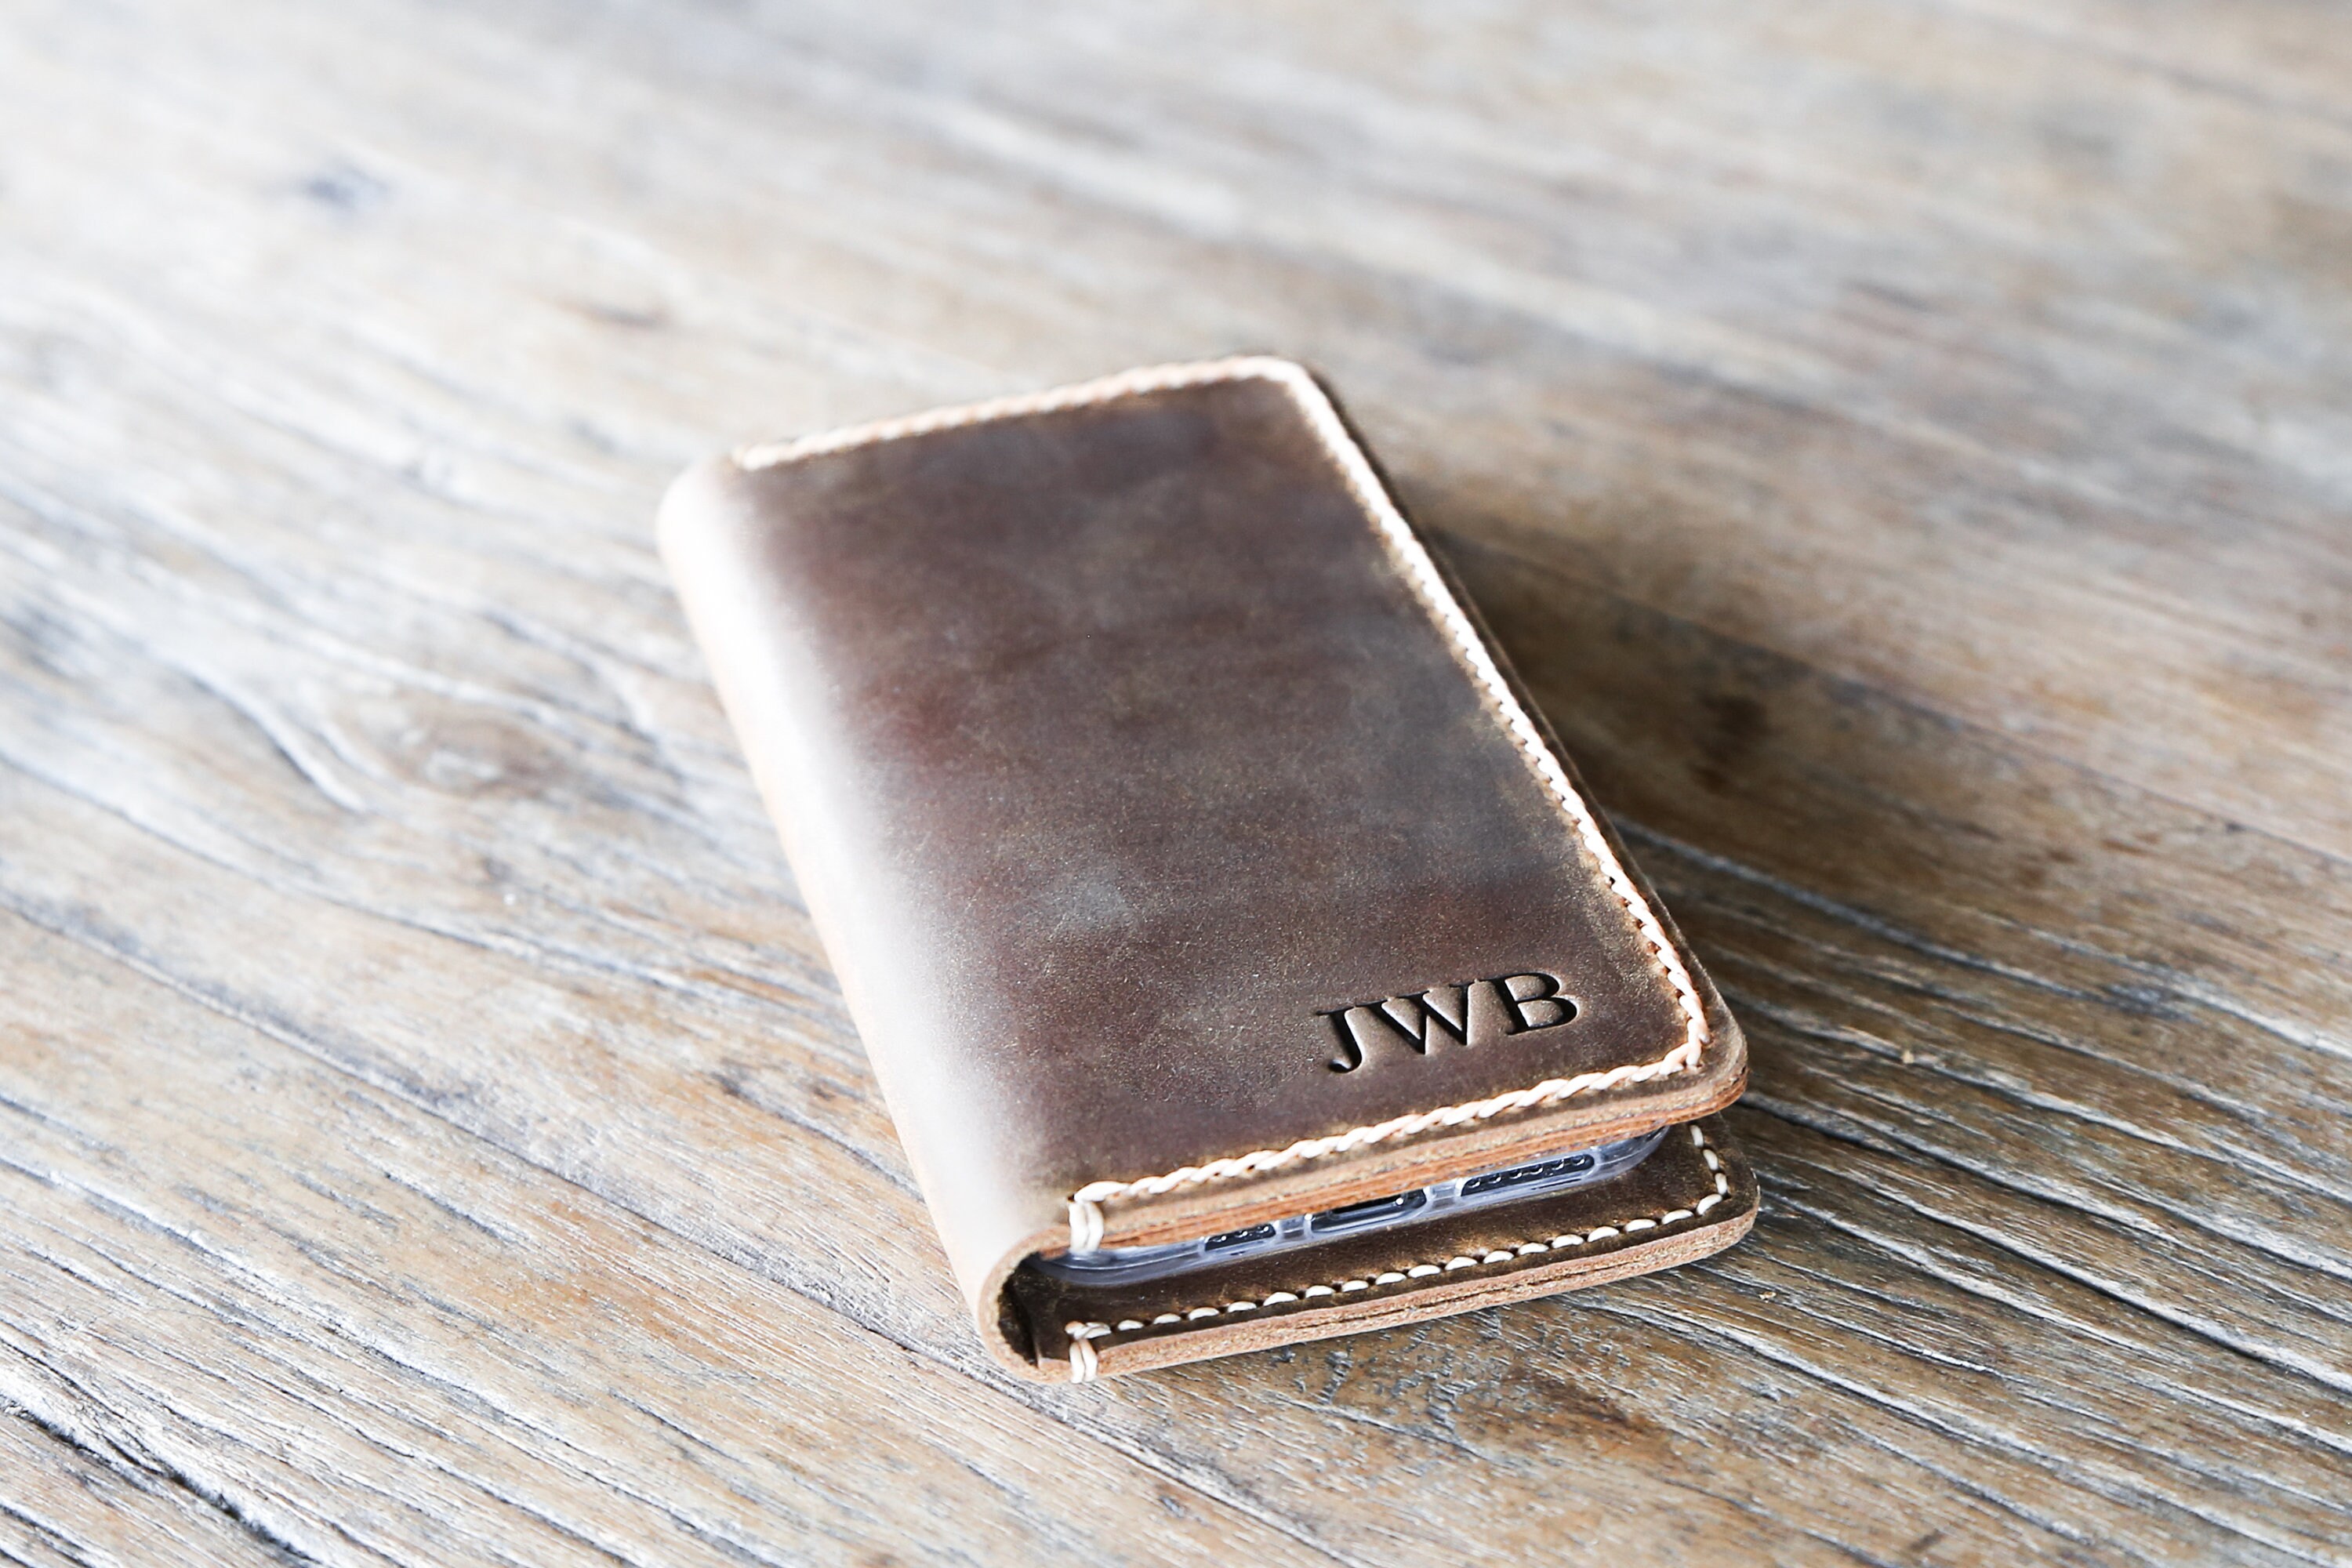 IPhone Leather Wallet Case All iPhone Devices Pick Your 